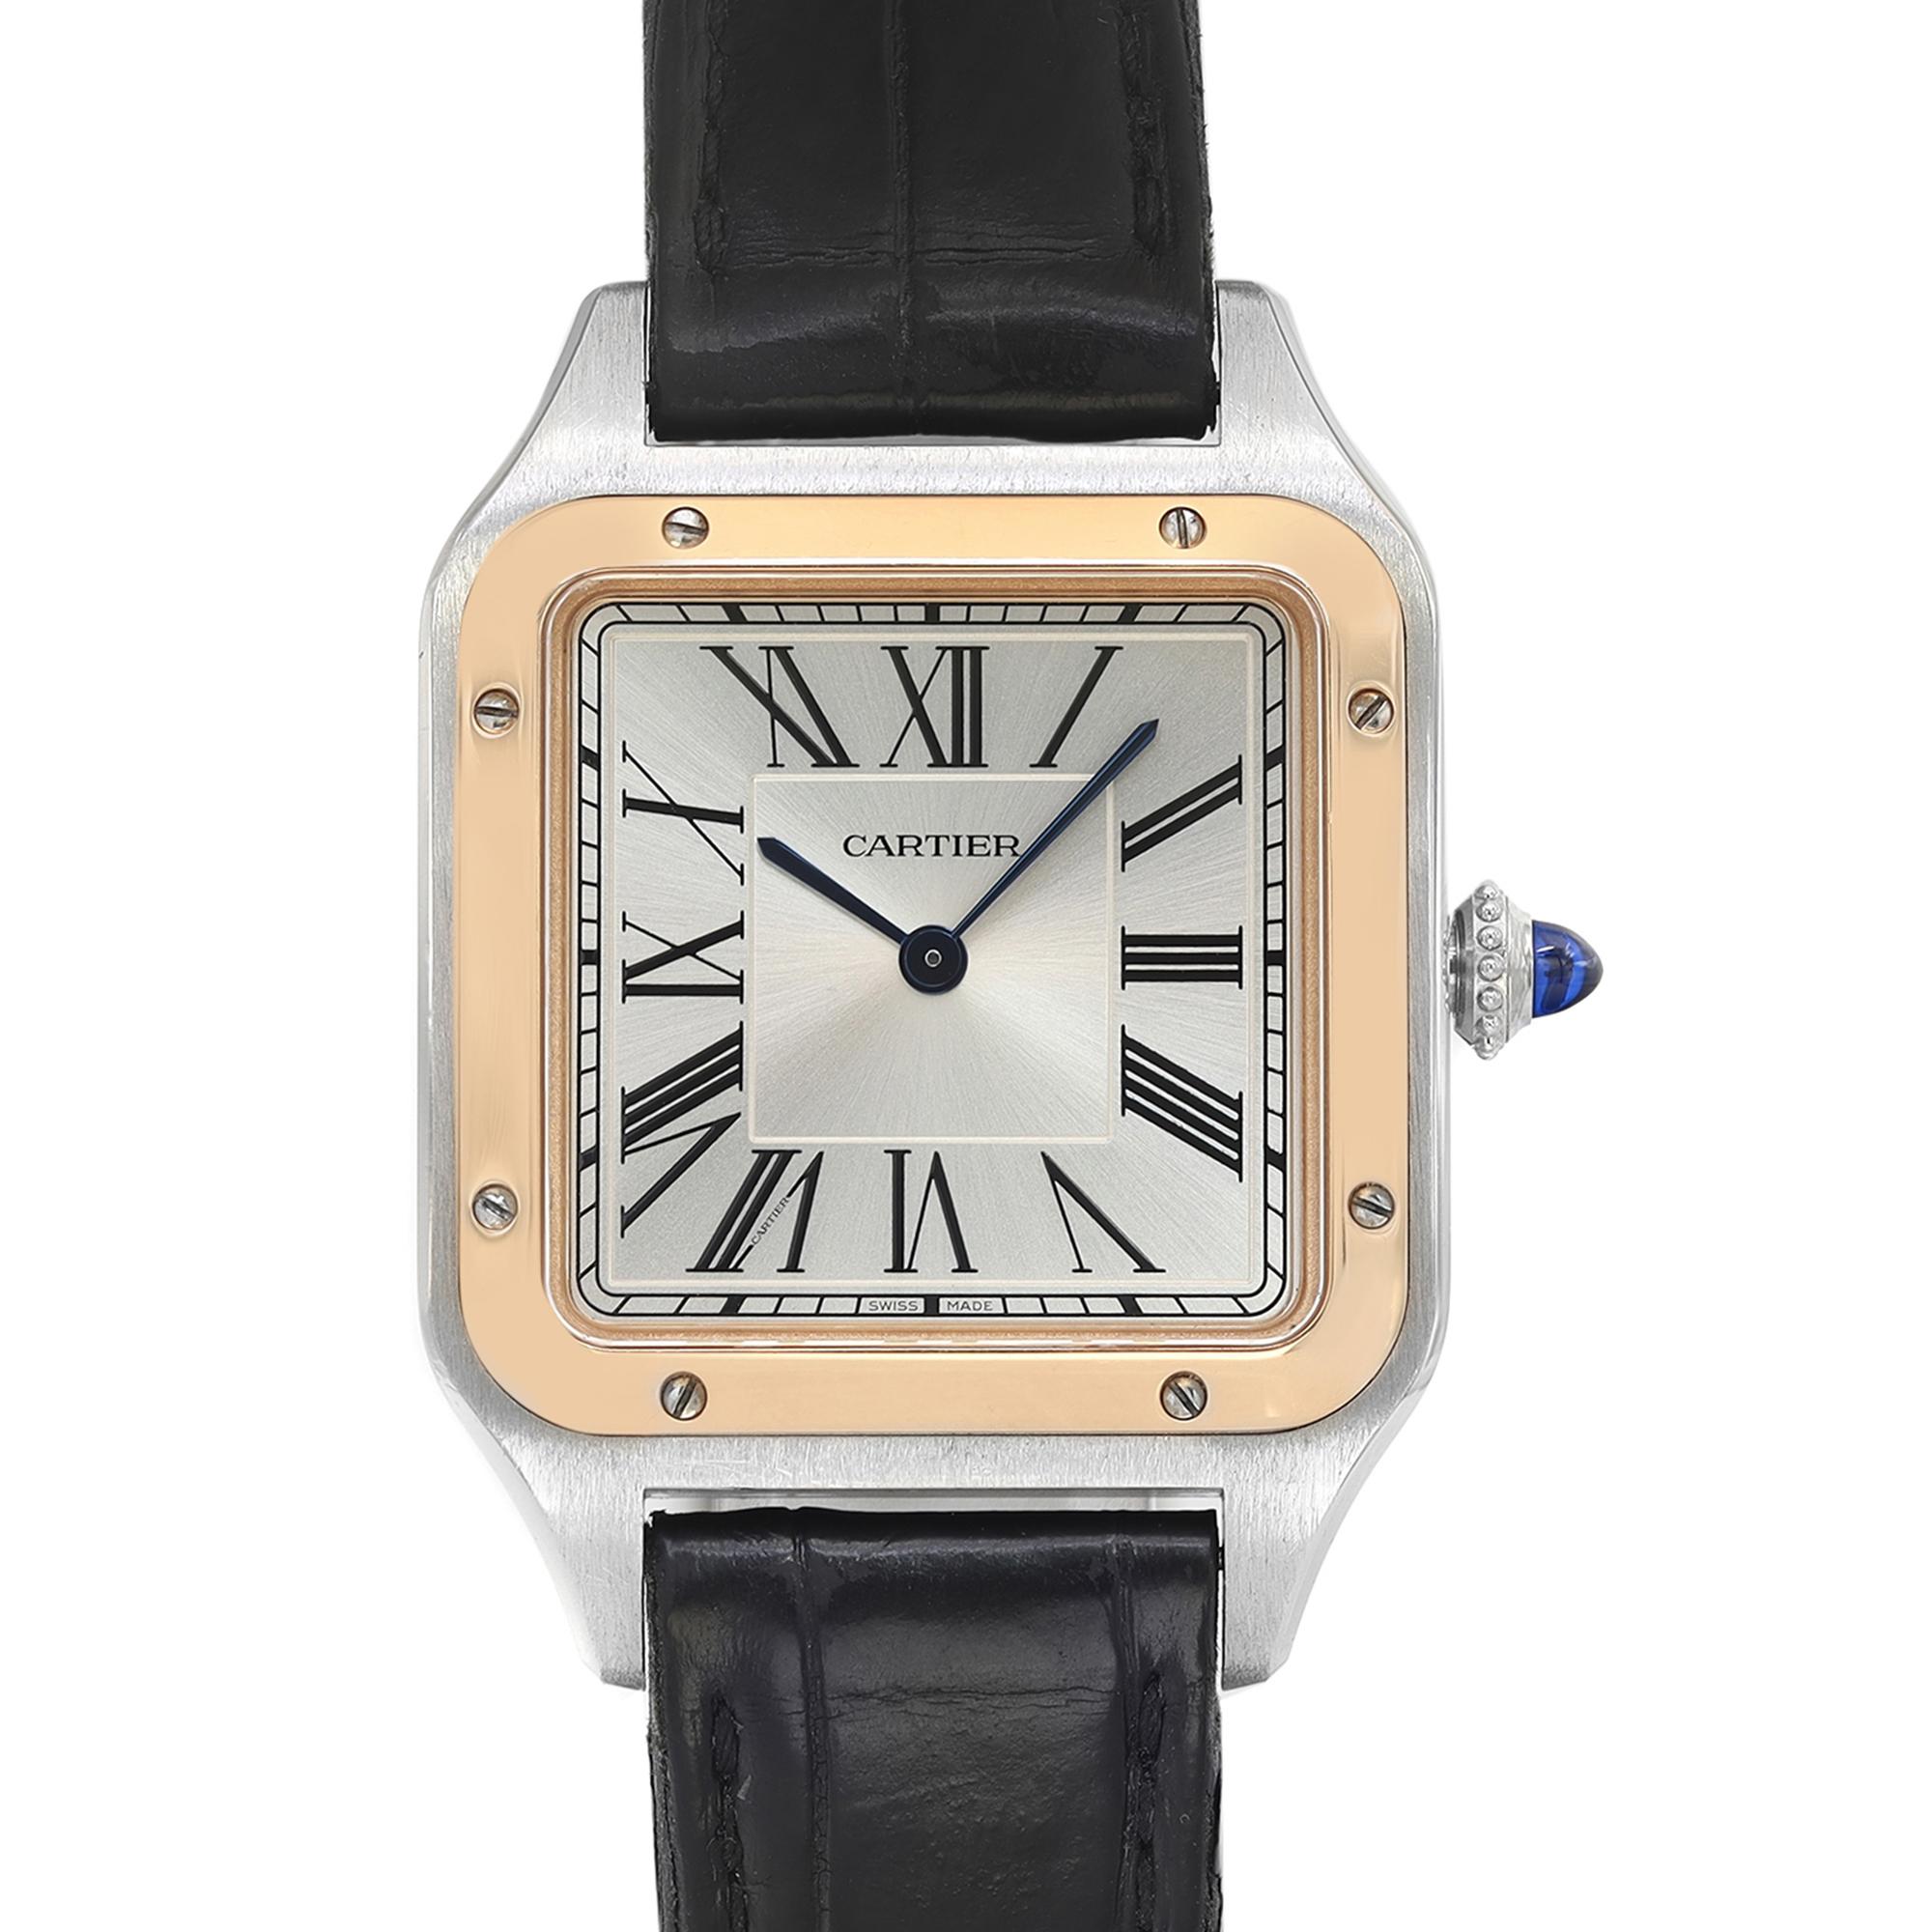 Pre-owned Cartier Santos-Dumont 31.5mm 18k Rose Gold Silver Dial Quartz Men Watch W2SA0011. The band has sworn signs around adjustable holes. No Original Box and Papers are Included. Comes with the seller's Presentation Box and the seller's